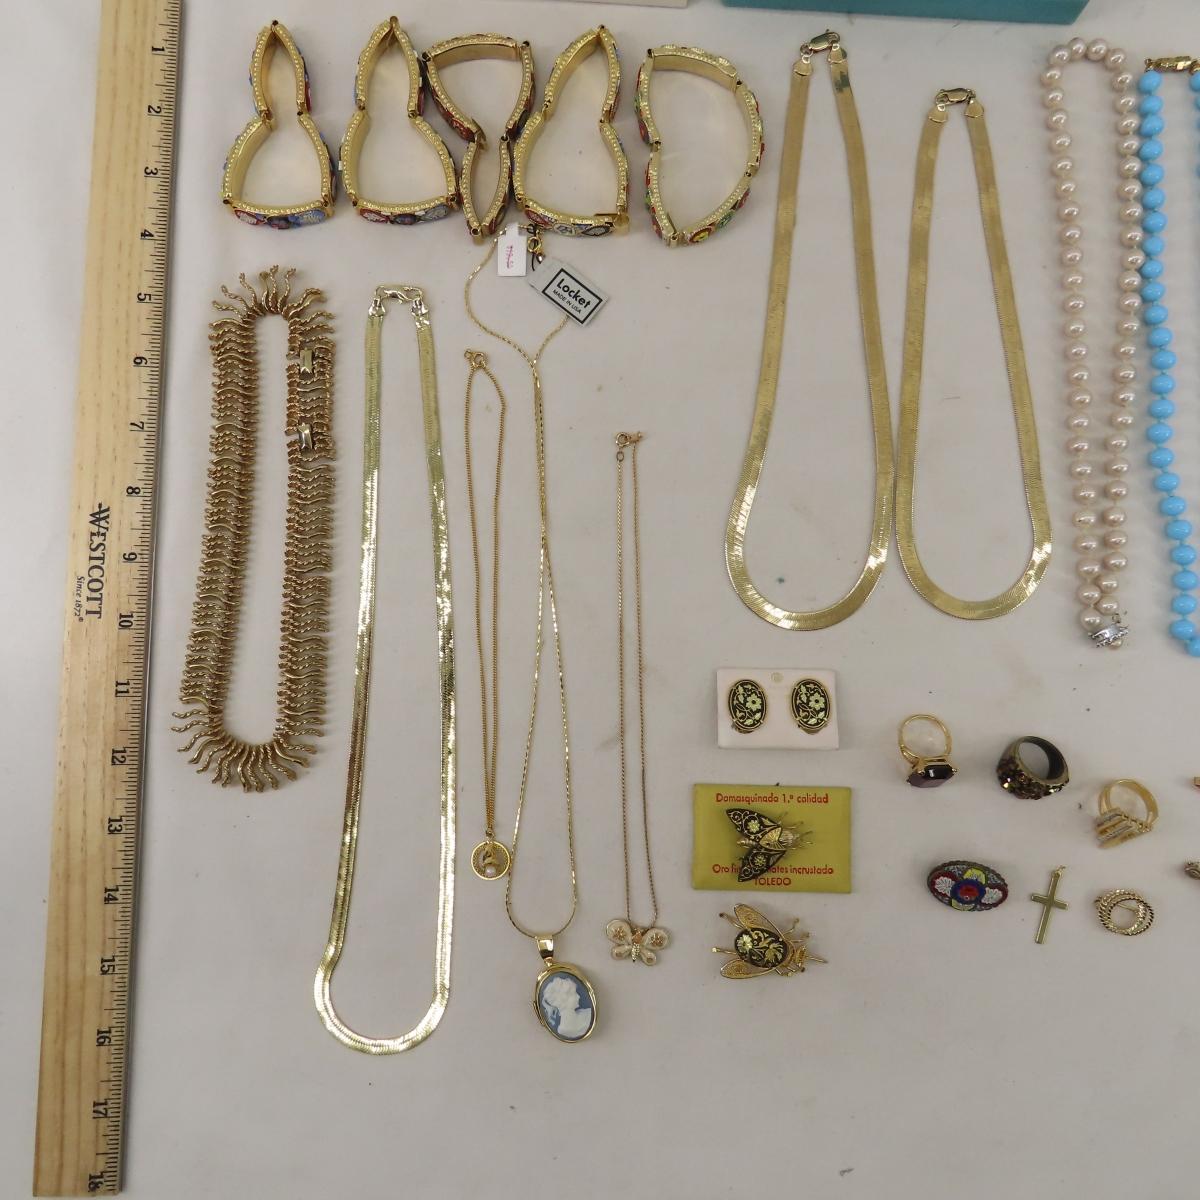 Lenora Dame, Charter Club & Other Vintage Jewelry